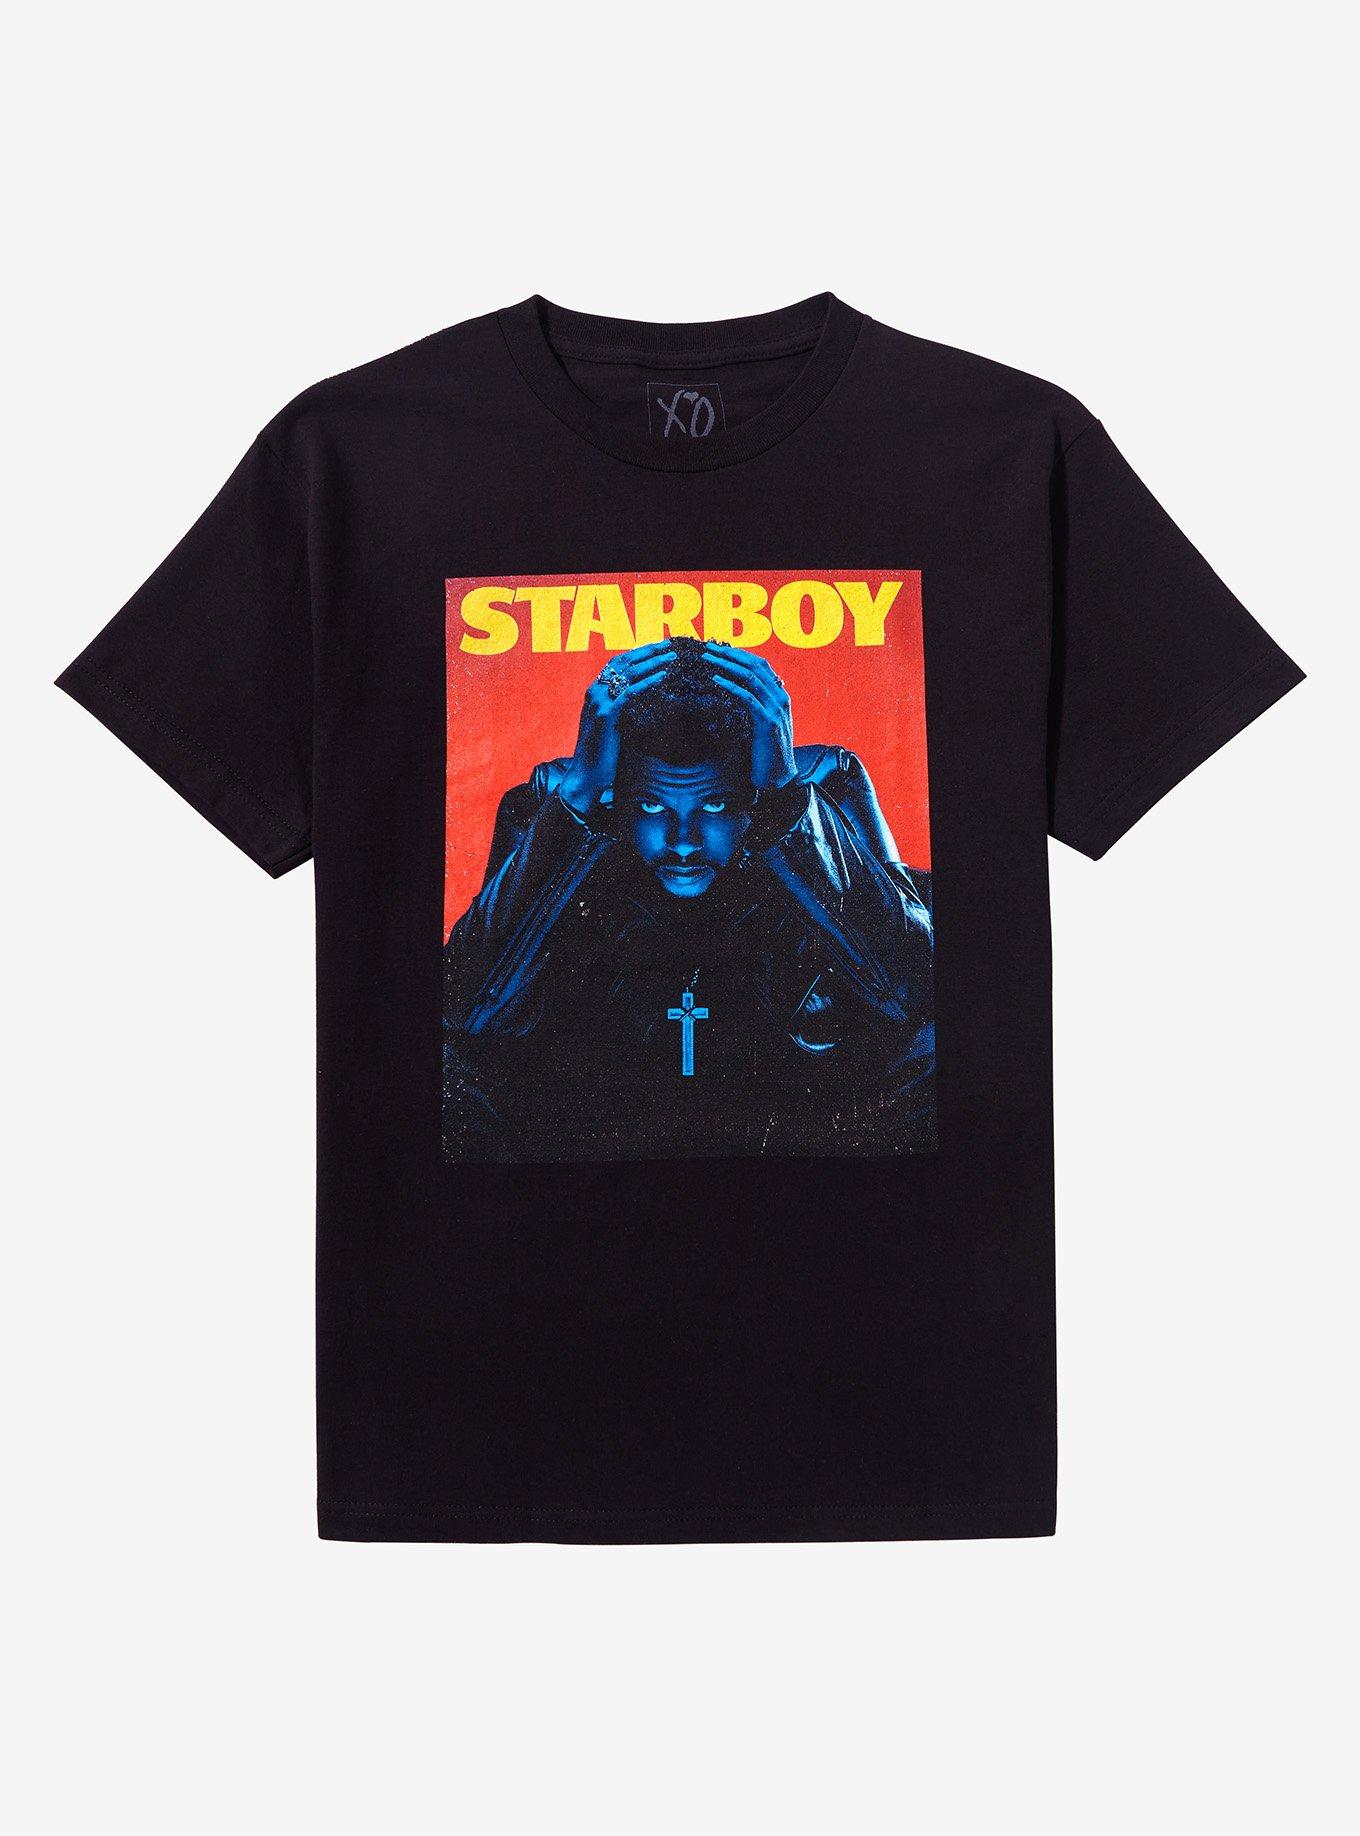 The Weeknd Starboy Cover T-Shirt